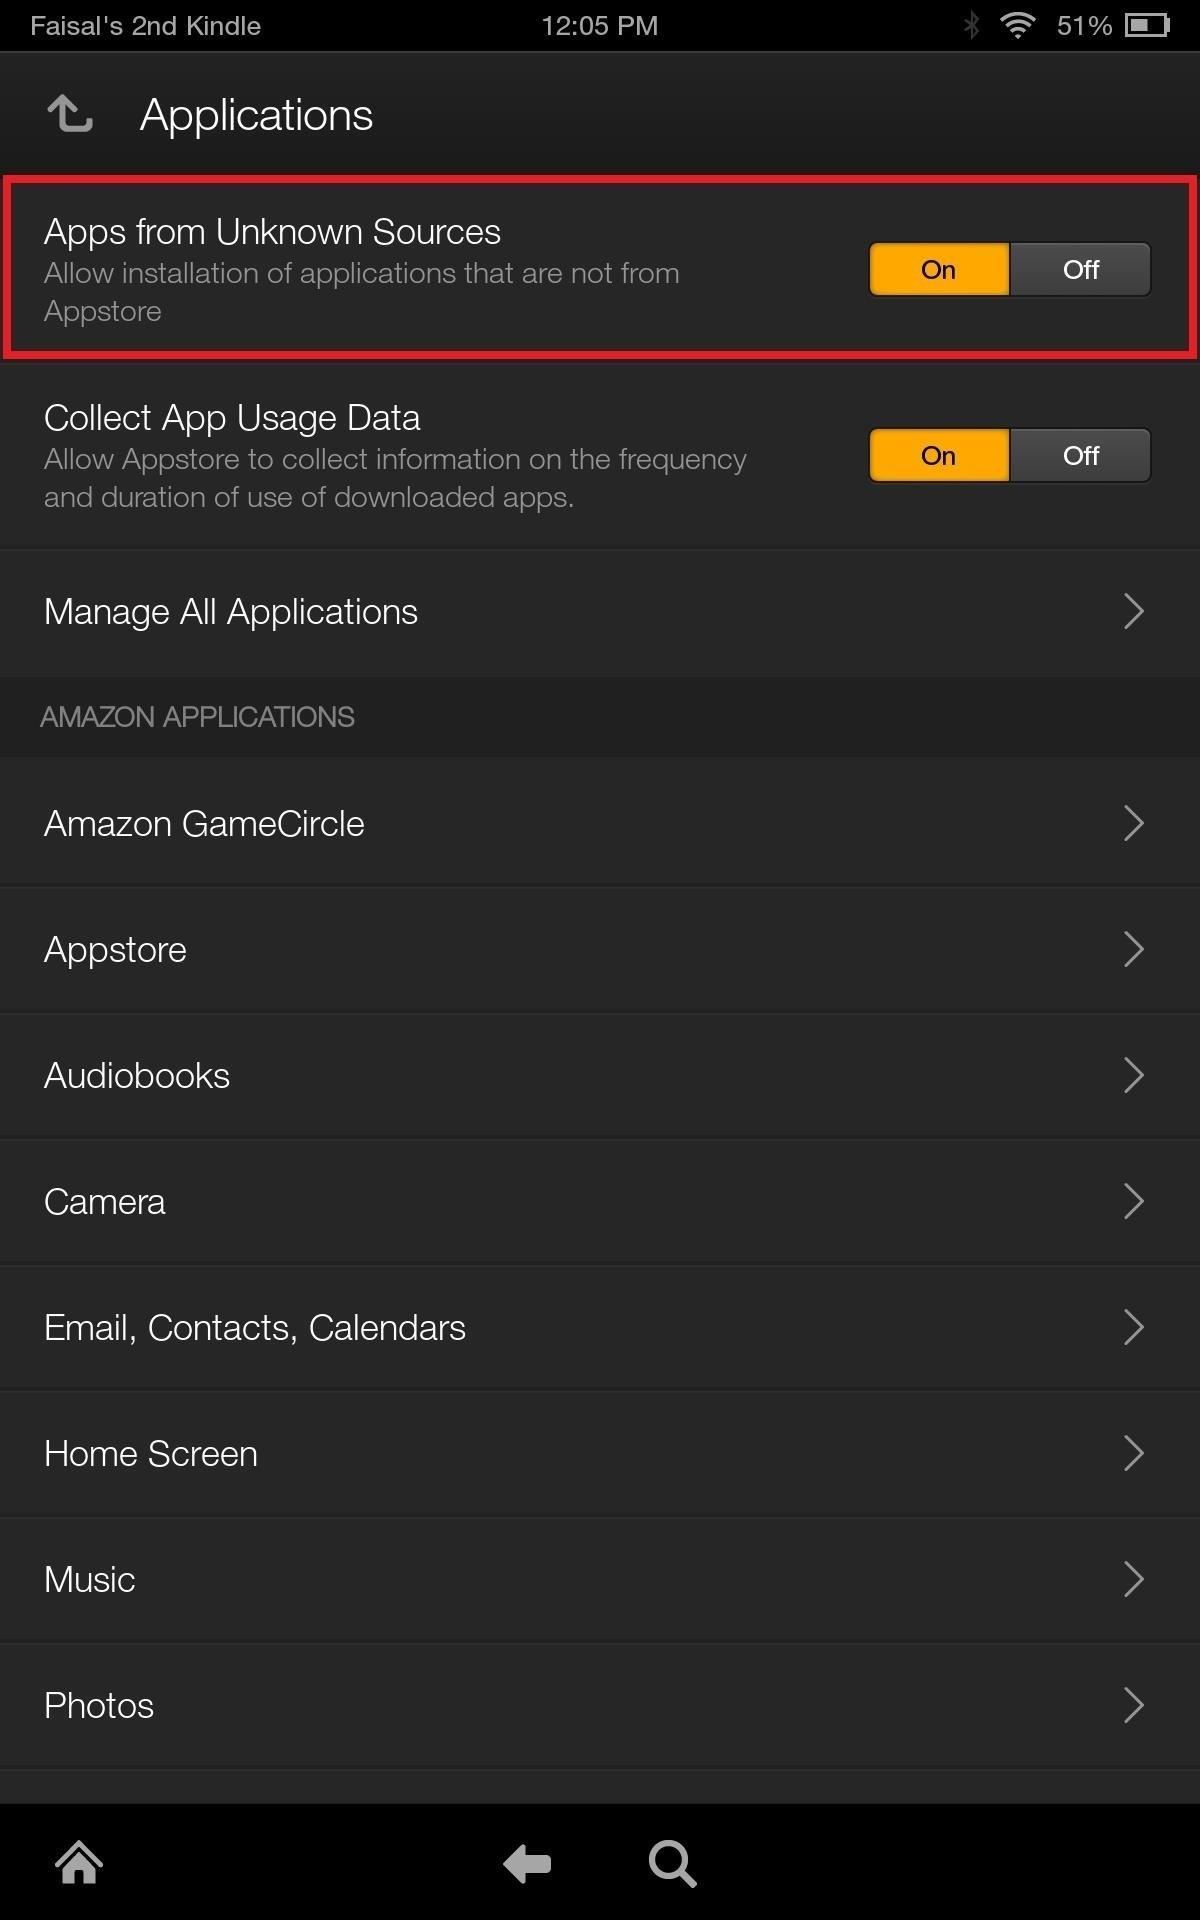 Install WhatsApp on a Kindle Fire HDX or Other Amazon Kindle